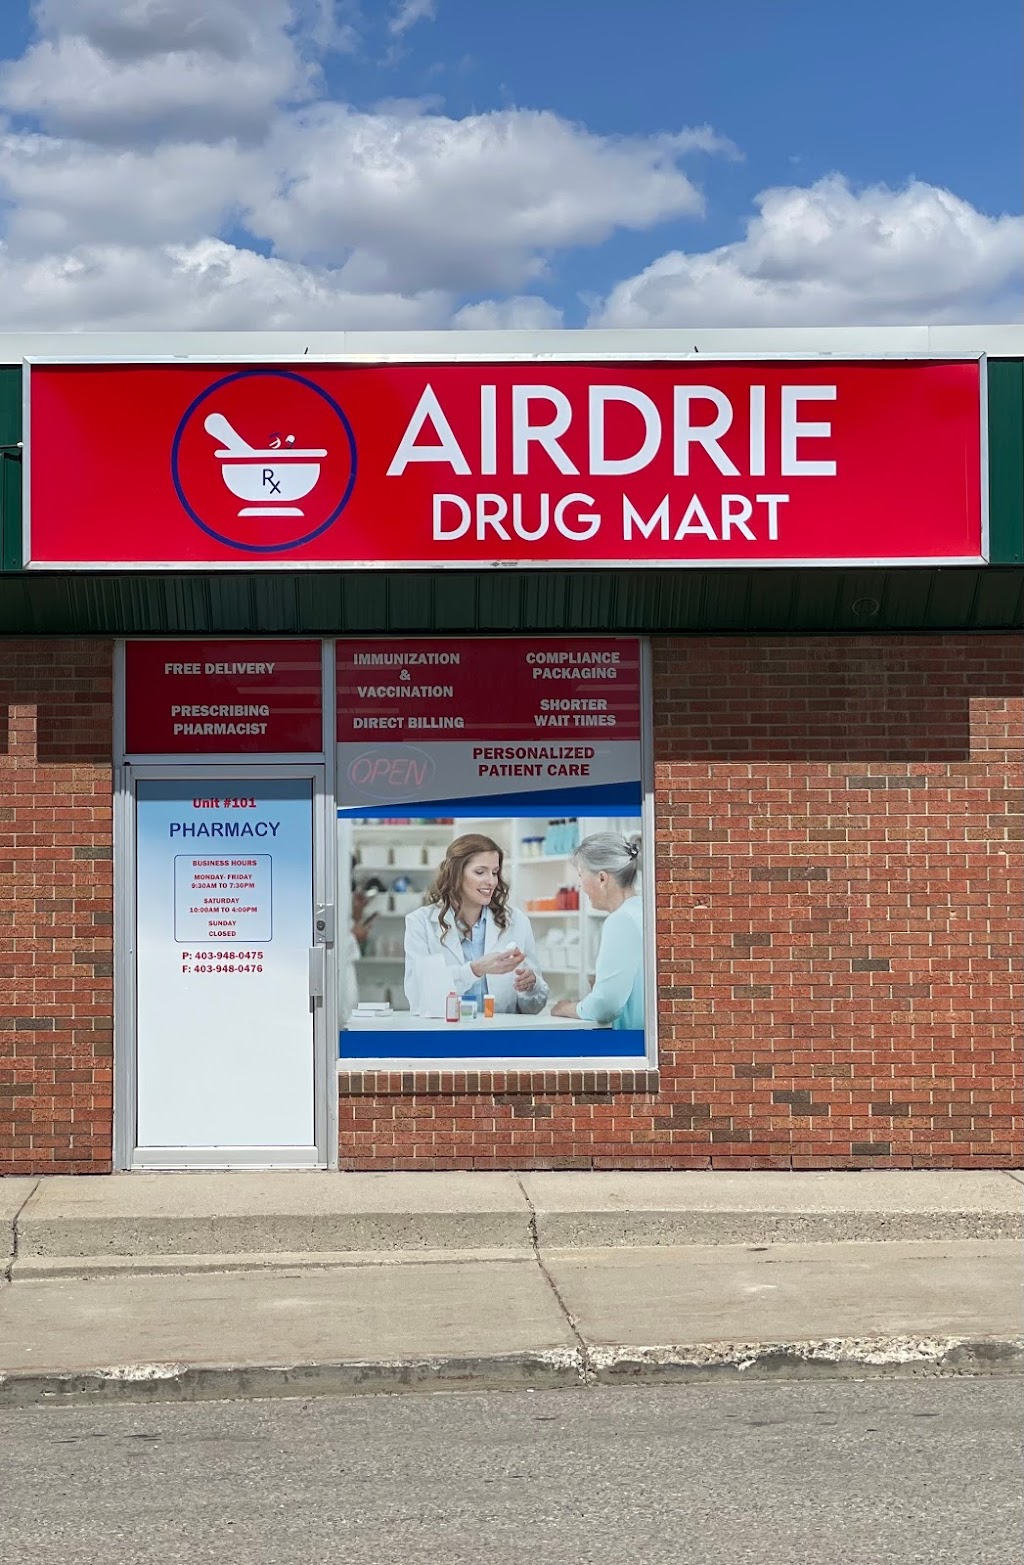 Airdrie Drug Mart | health | 124 1 Ave NE #101, Airdrie, AB T4B 0R4, Canada | 4039480475 OR +1 403-948-0475